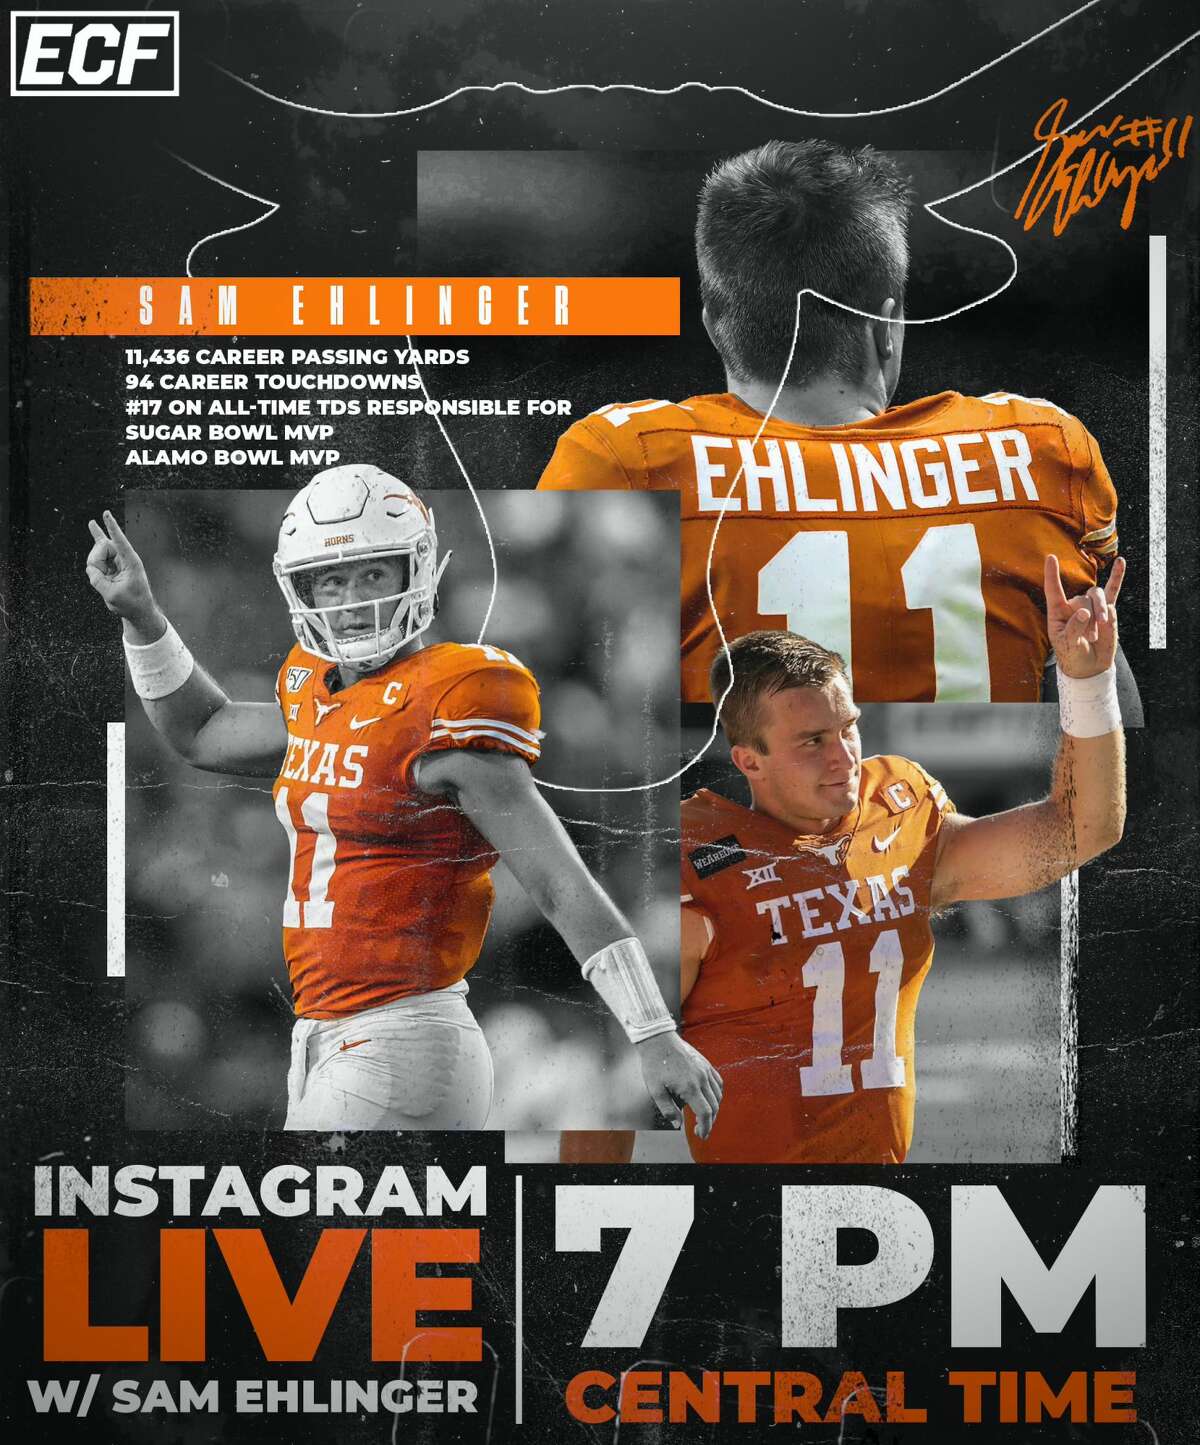 Elite College Football has grown their audience with player and coach interviews, all on Instagram Live.